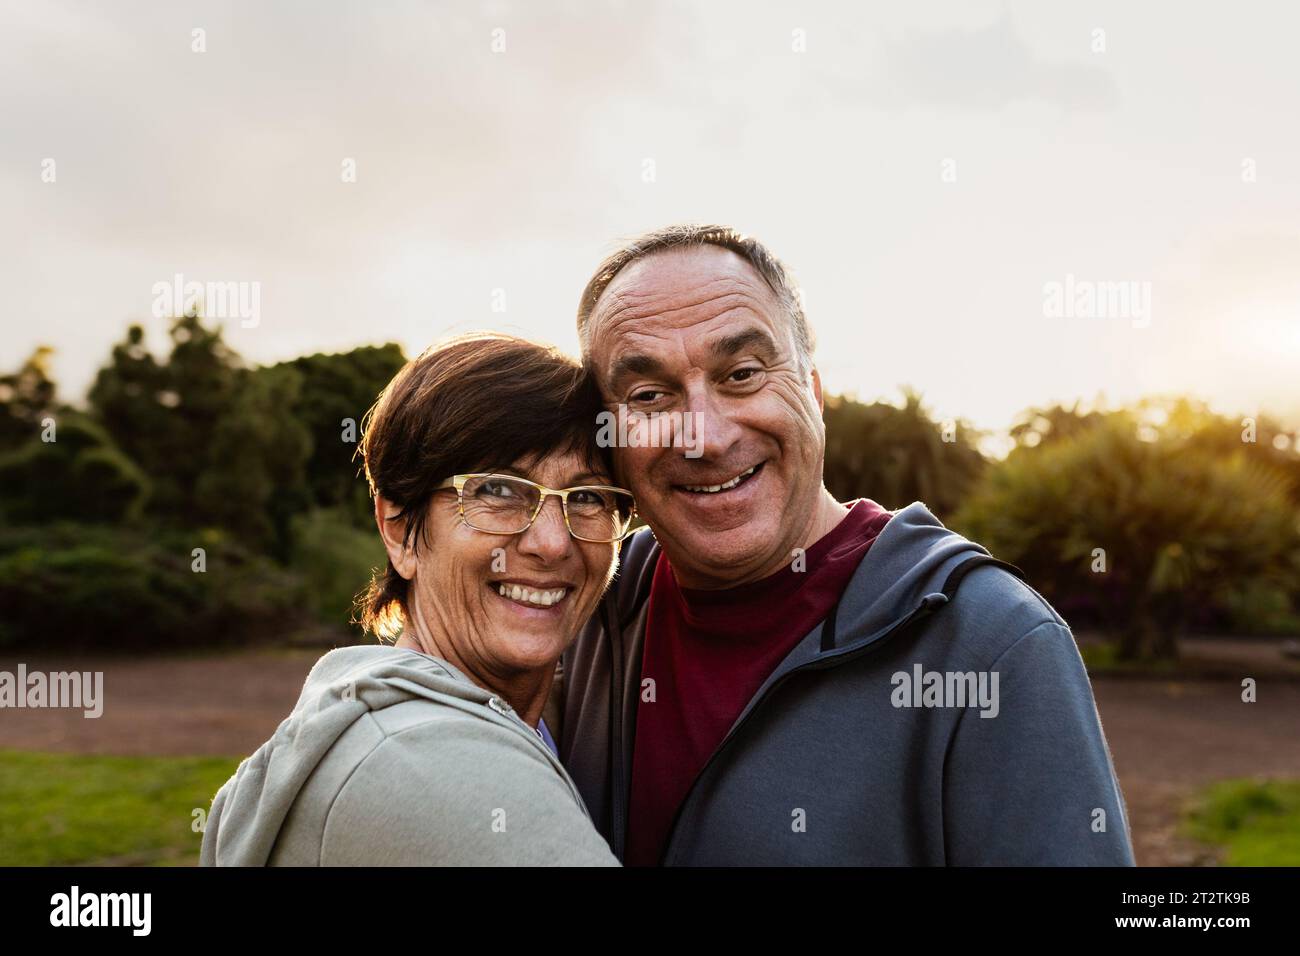 Happy senior couple having fun smiling into the camera after workout activities in a public park Stock Photo